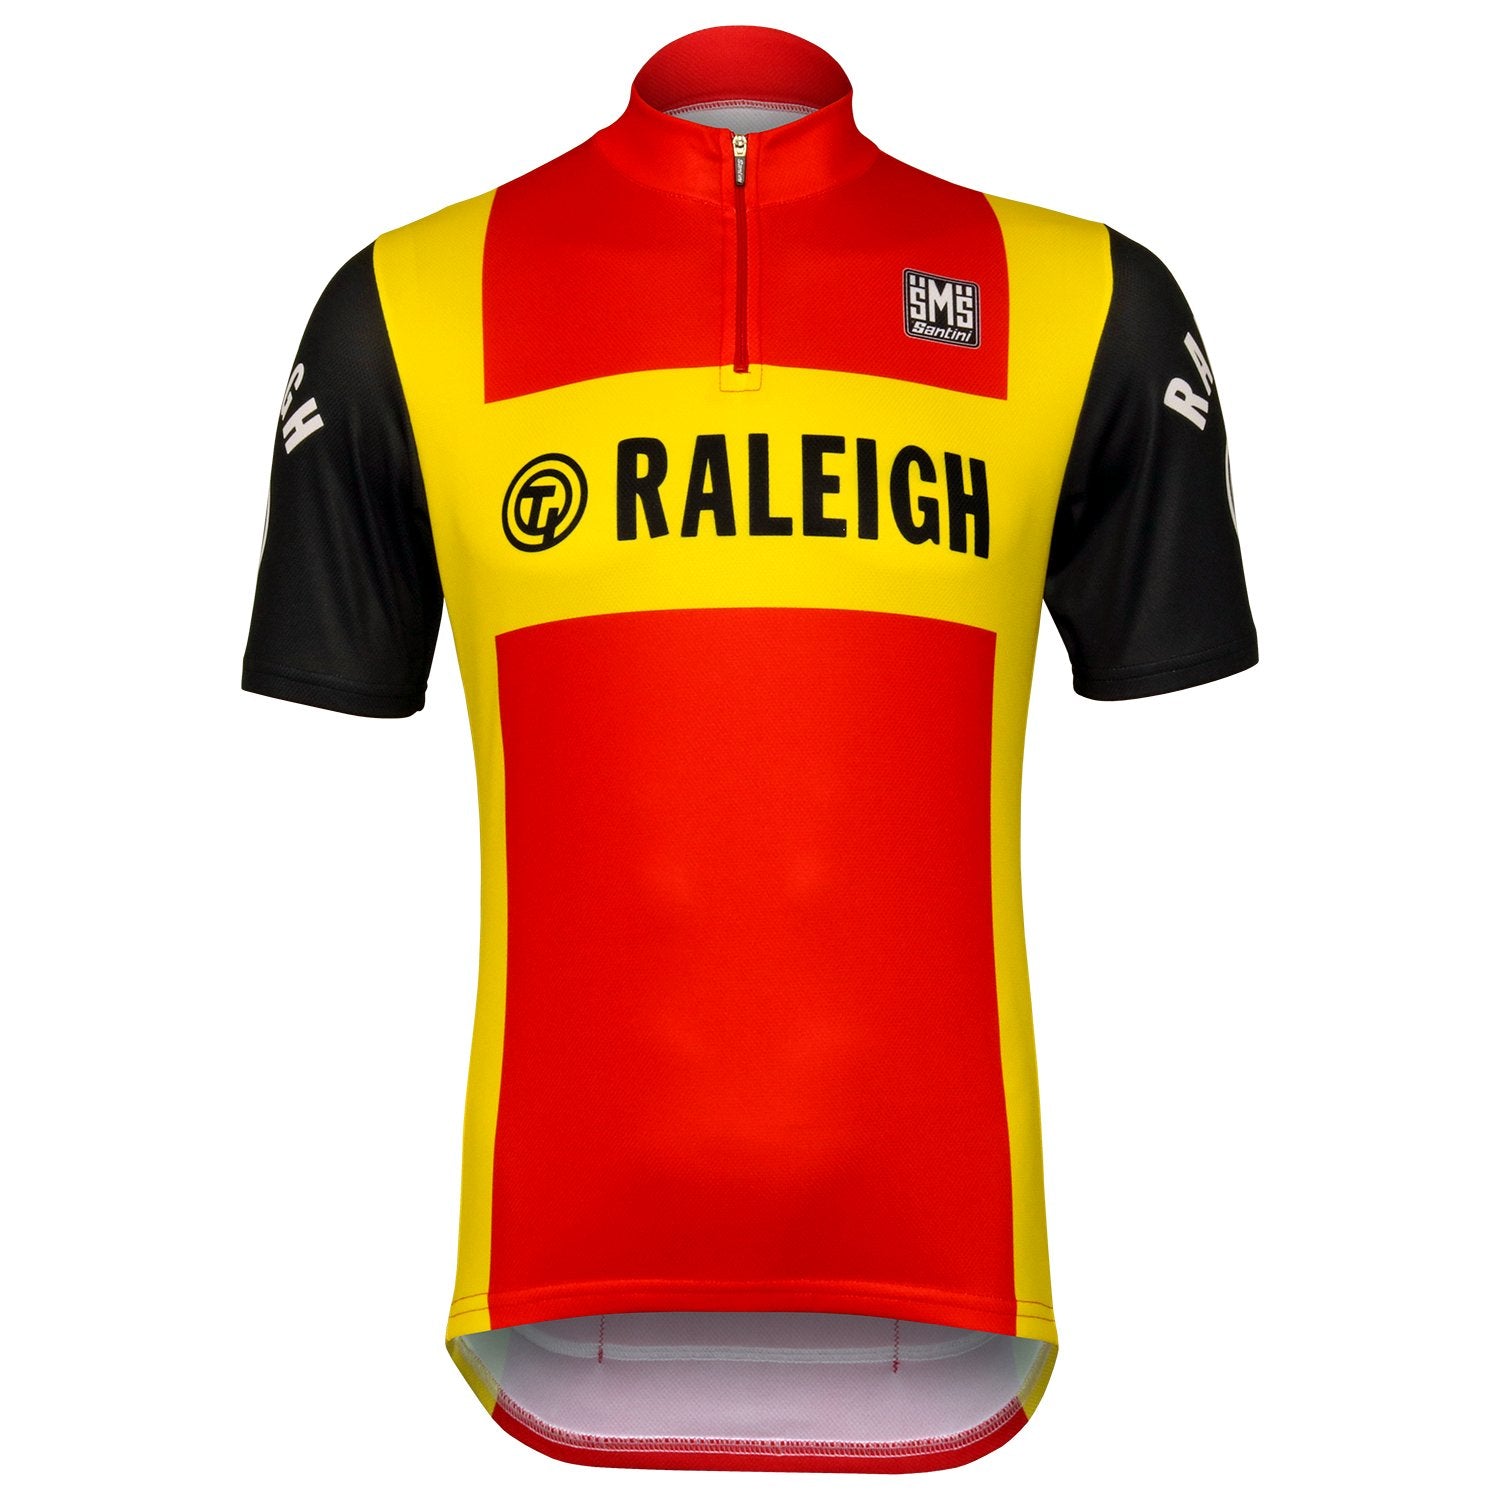 Threads of History: TI-Raleigh